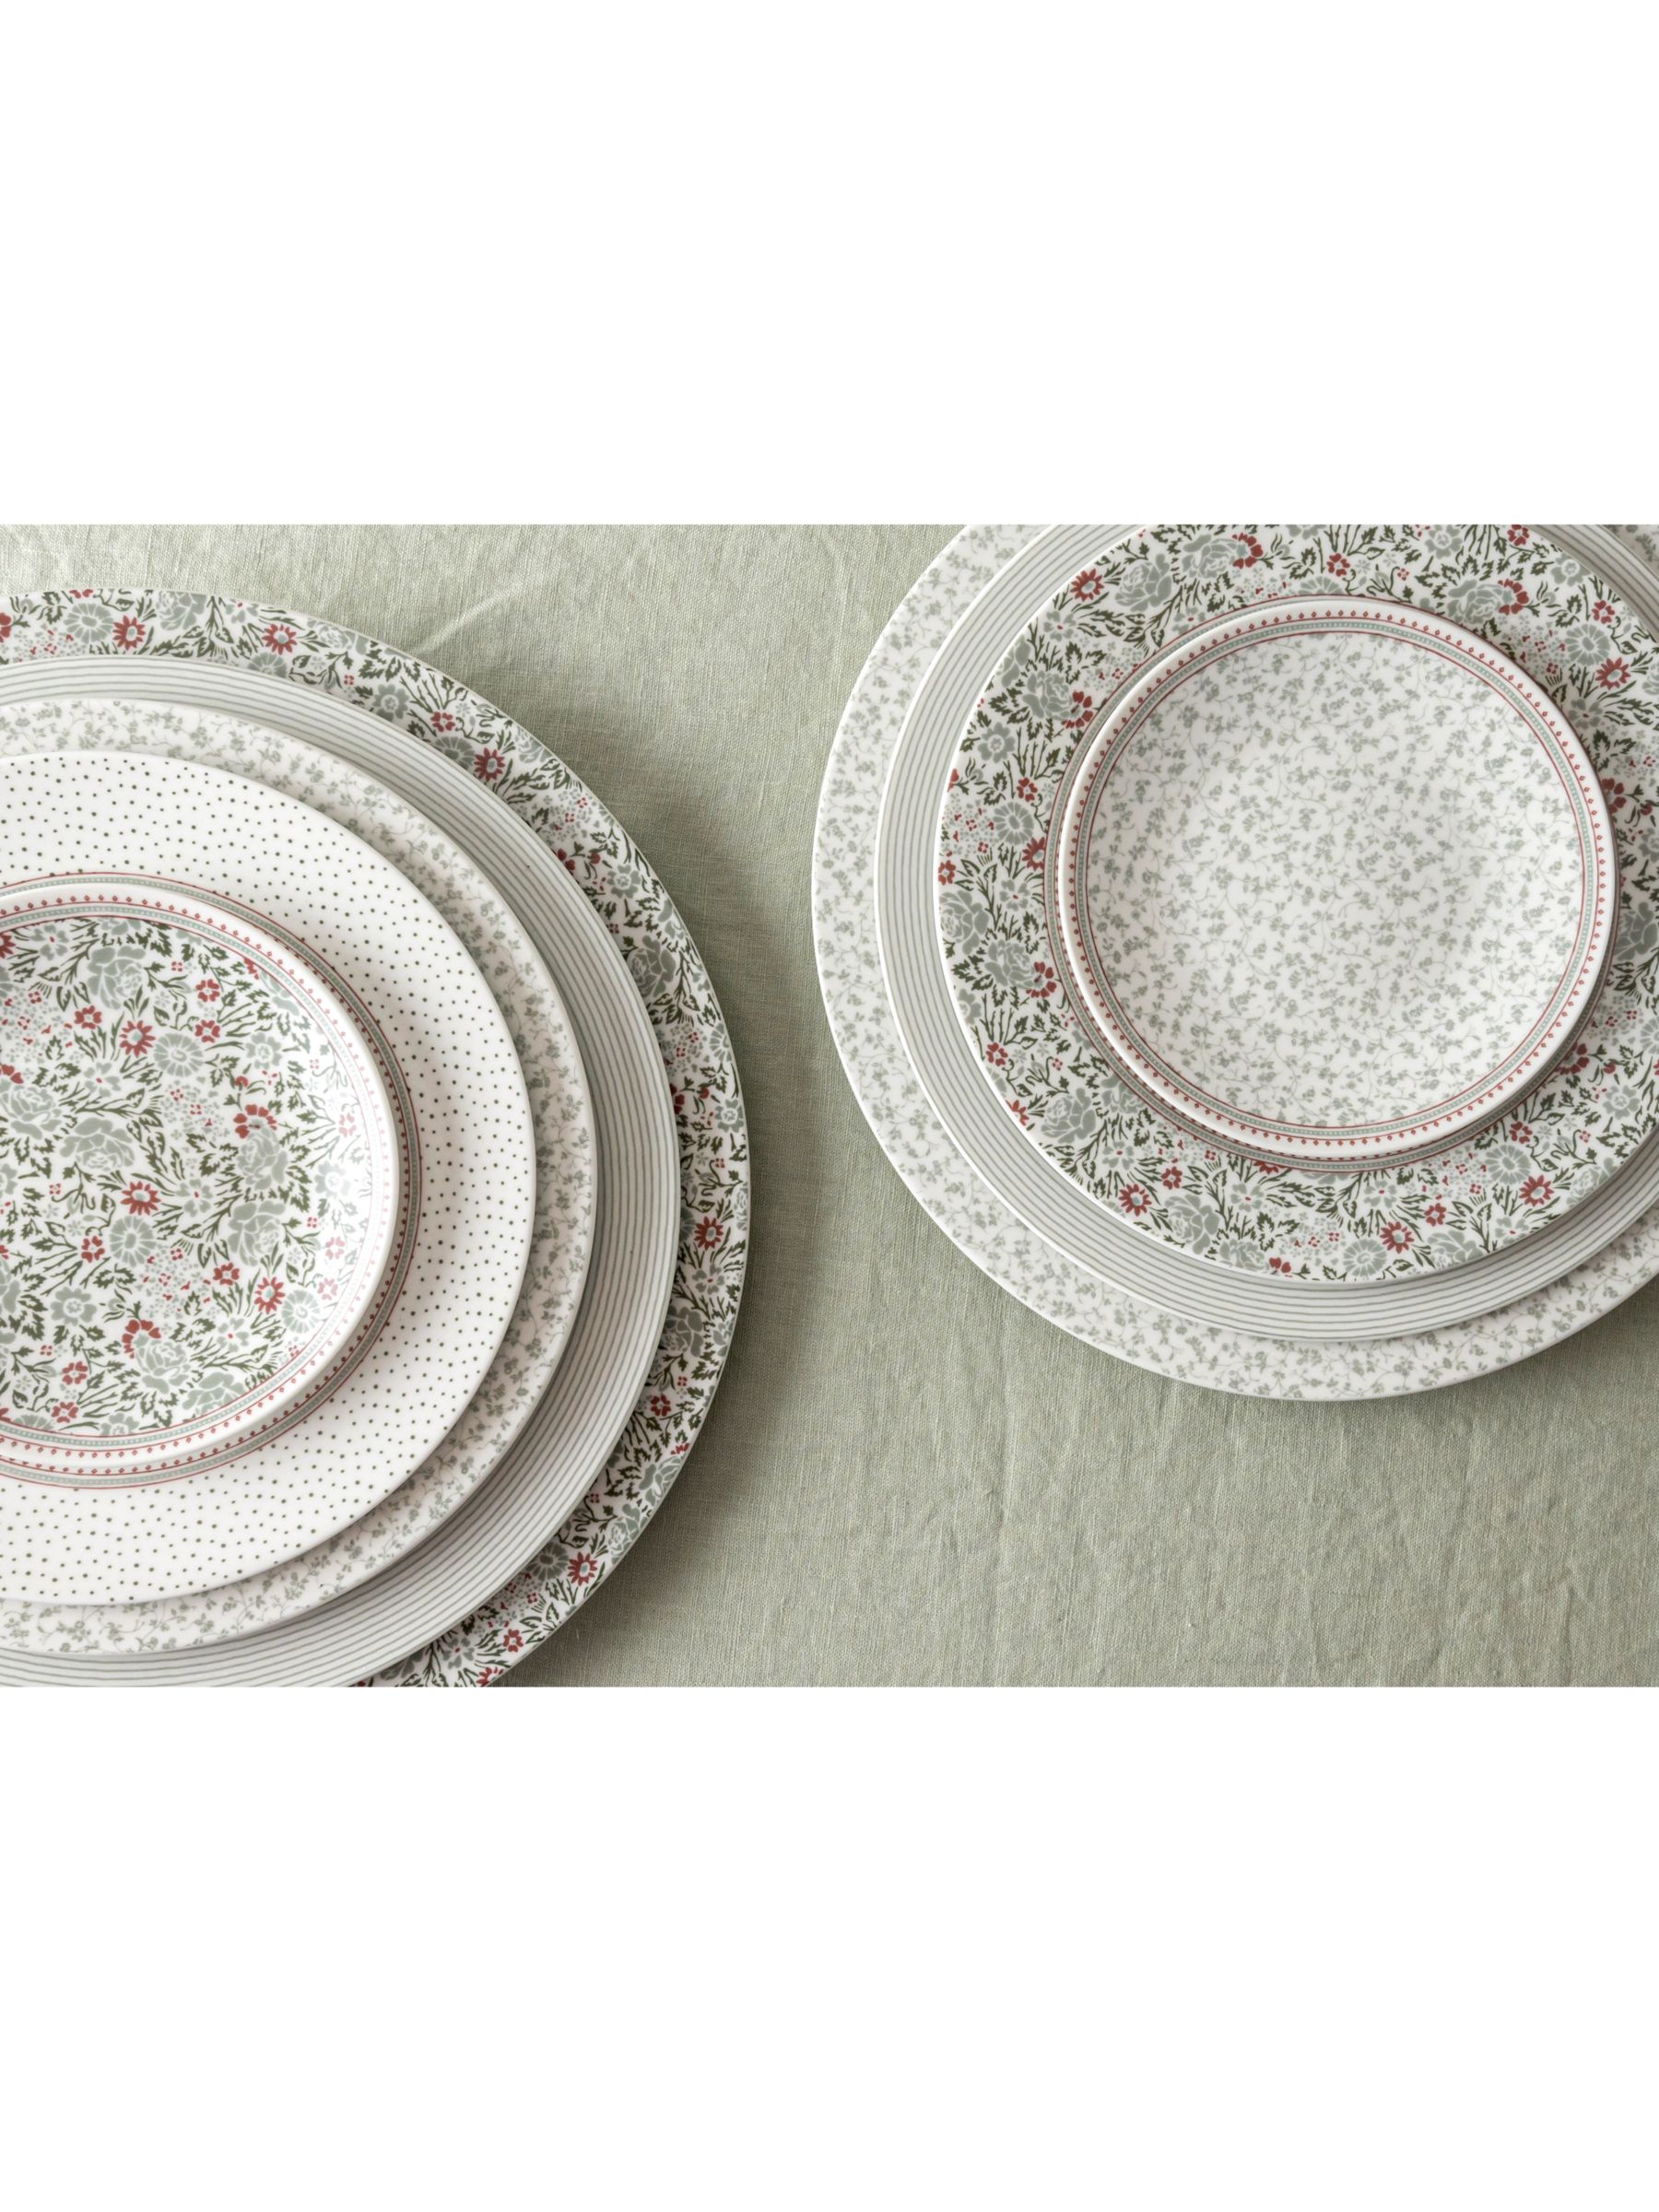 Laura Ashley Wild Clematis Dinner 27.5cm, Green White/Sage Collectables Plate, Set 4, of